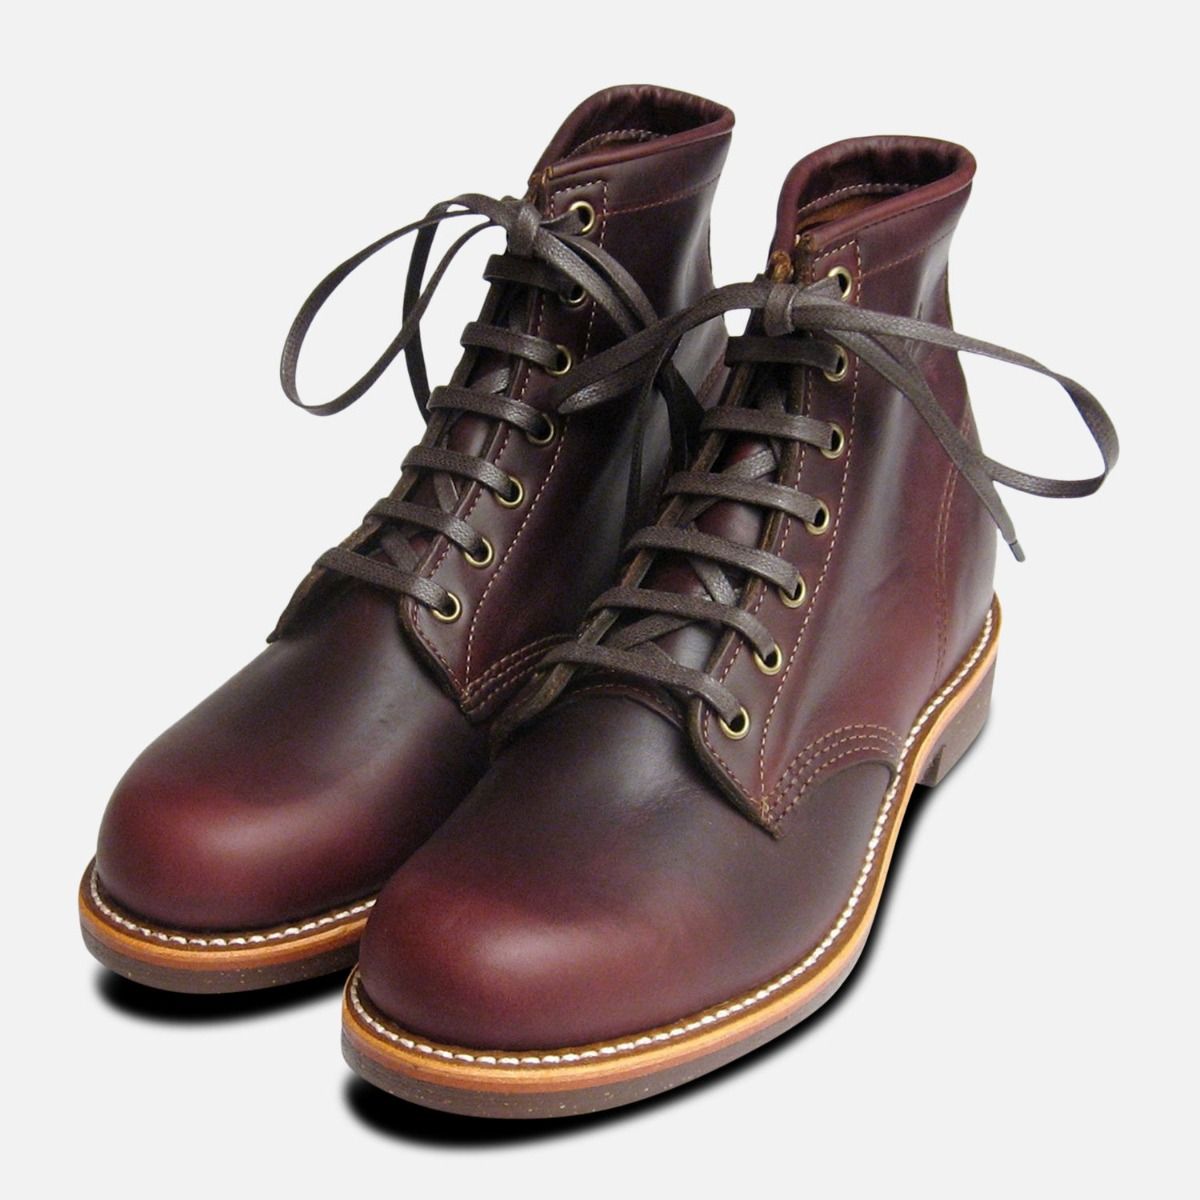 Chippewa Cordovan Leather Burgundy Lace Up Boots Vibram Sole